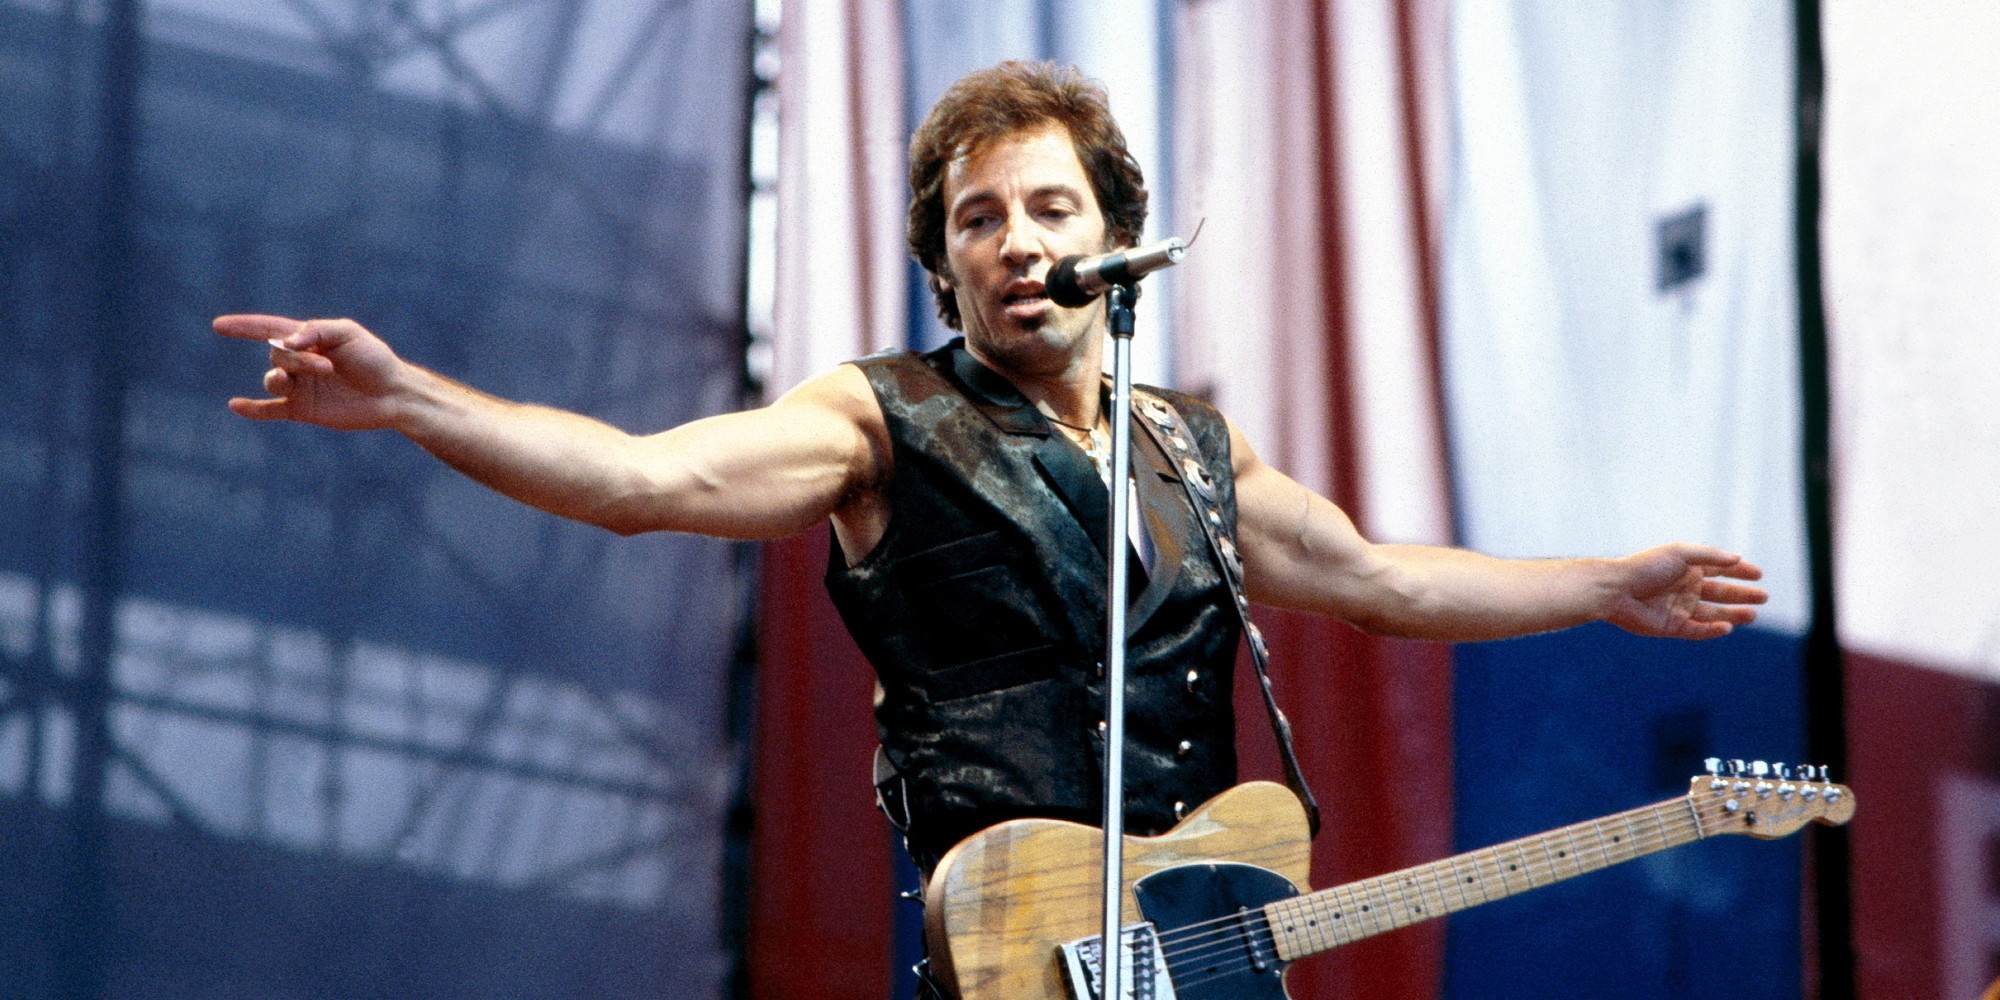 The first CD that was pressed in the states was Bruce Springsteen’s "Born in the USA."